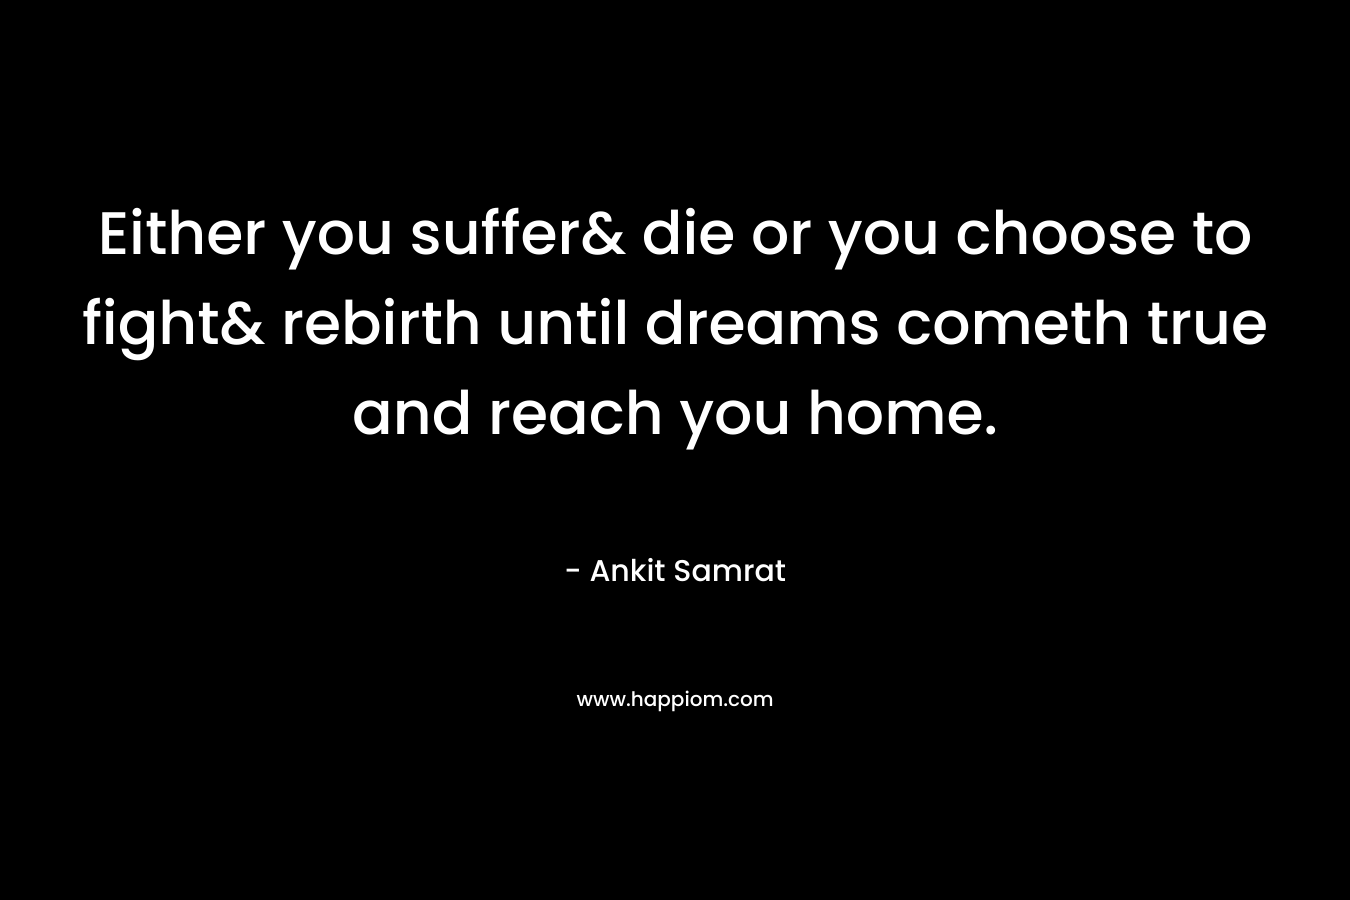 Either you suffer& die or you choose to fight& rebirth until dreams cometh true and reach you home.